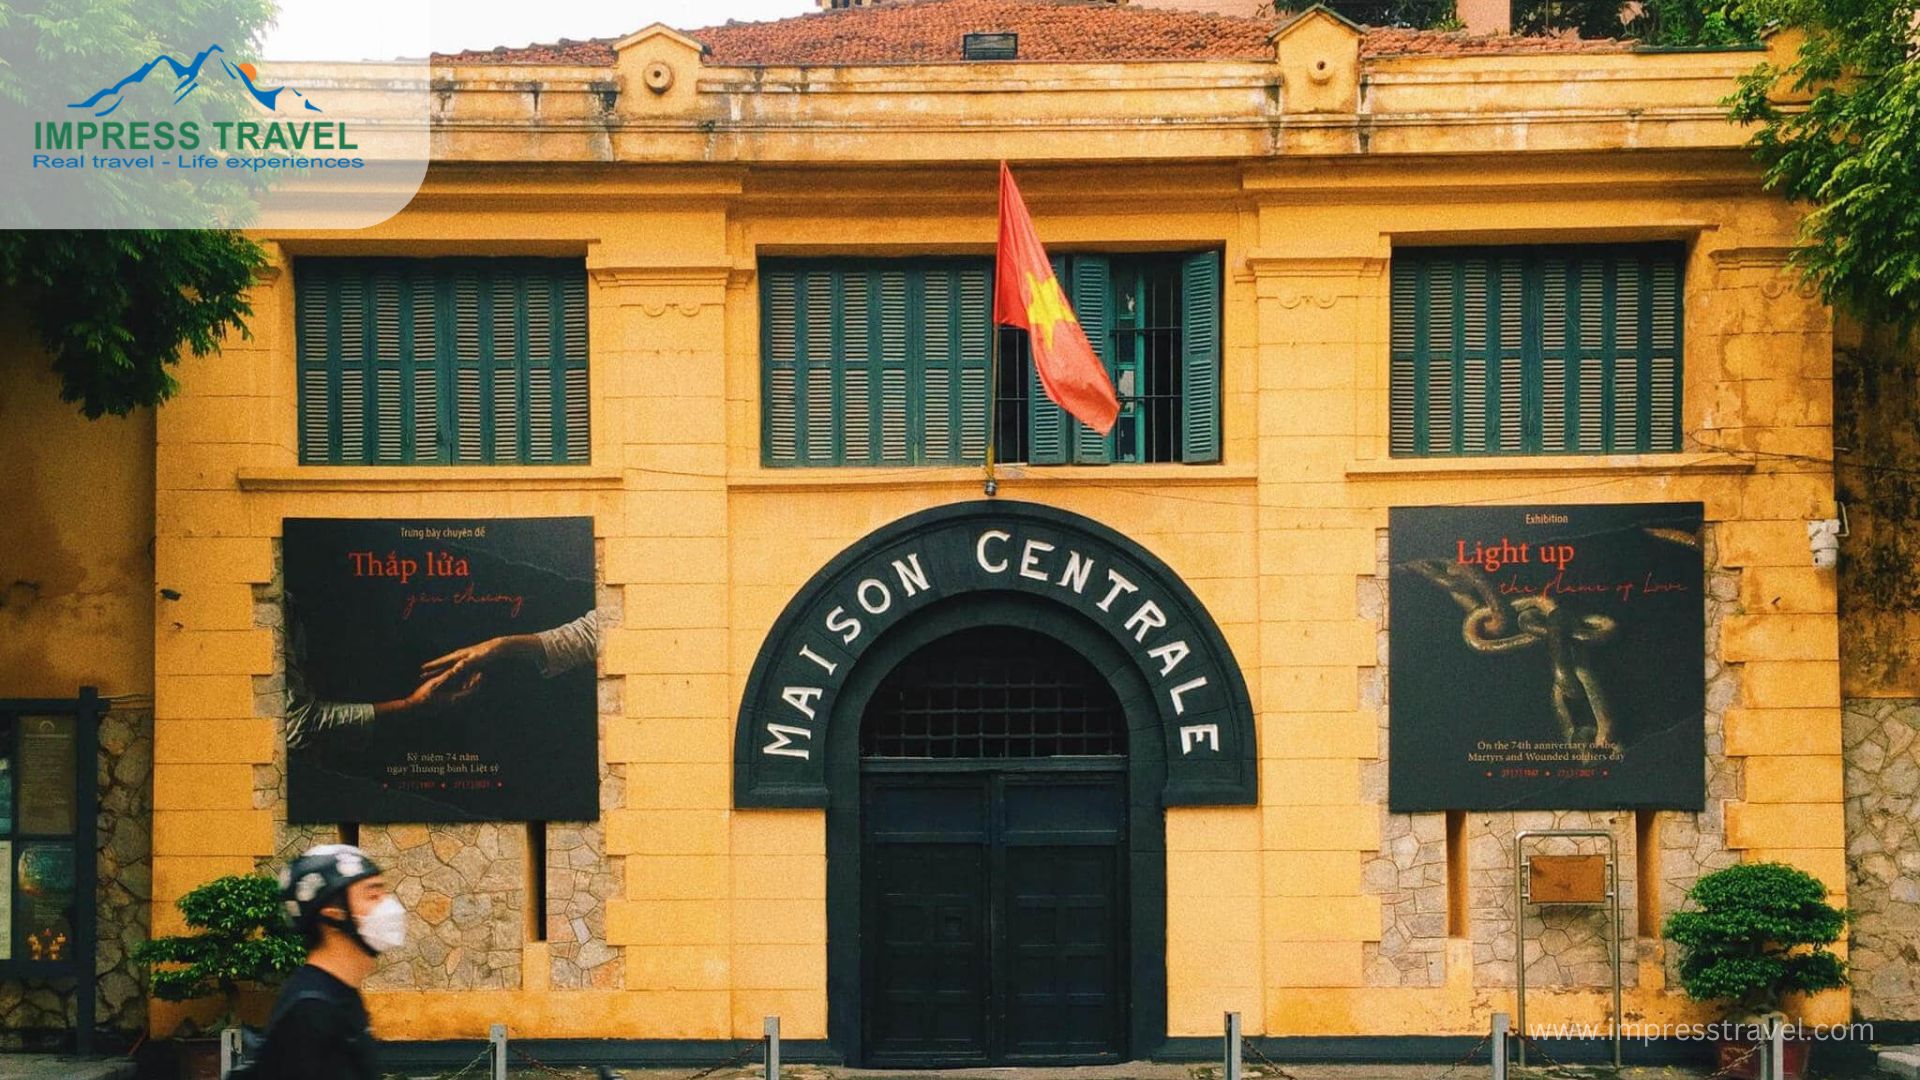 Hoa Lo Prison gained notoriety during the Vietnam War as the place where American prisoners of war were held captive. Today, the prison serves as a museum documenting its grim history